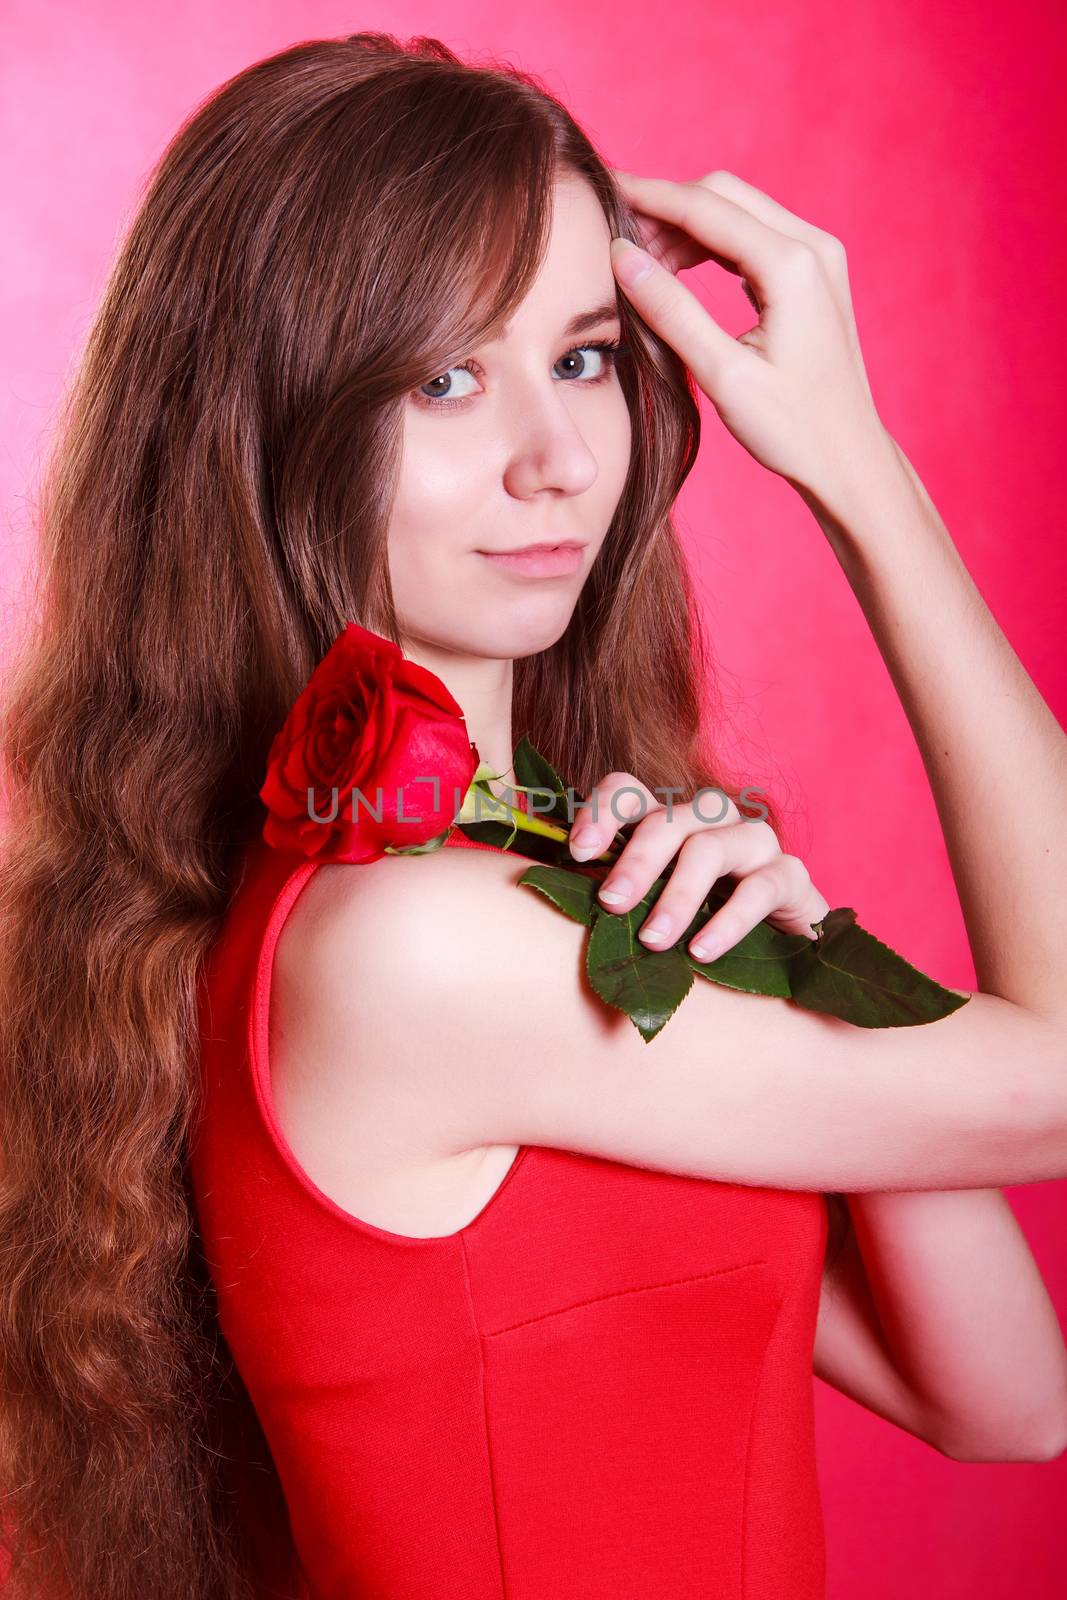 Beautiful young woman with a red rose by Artzzz